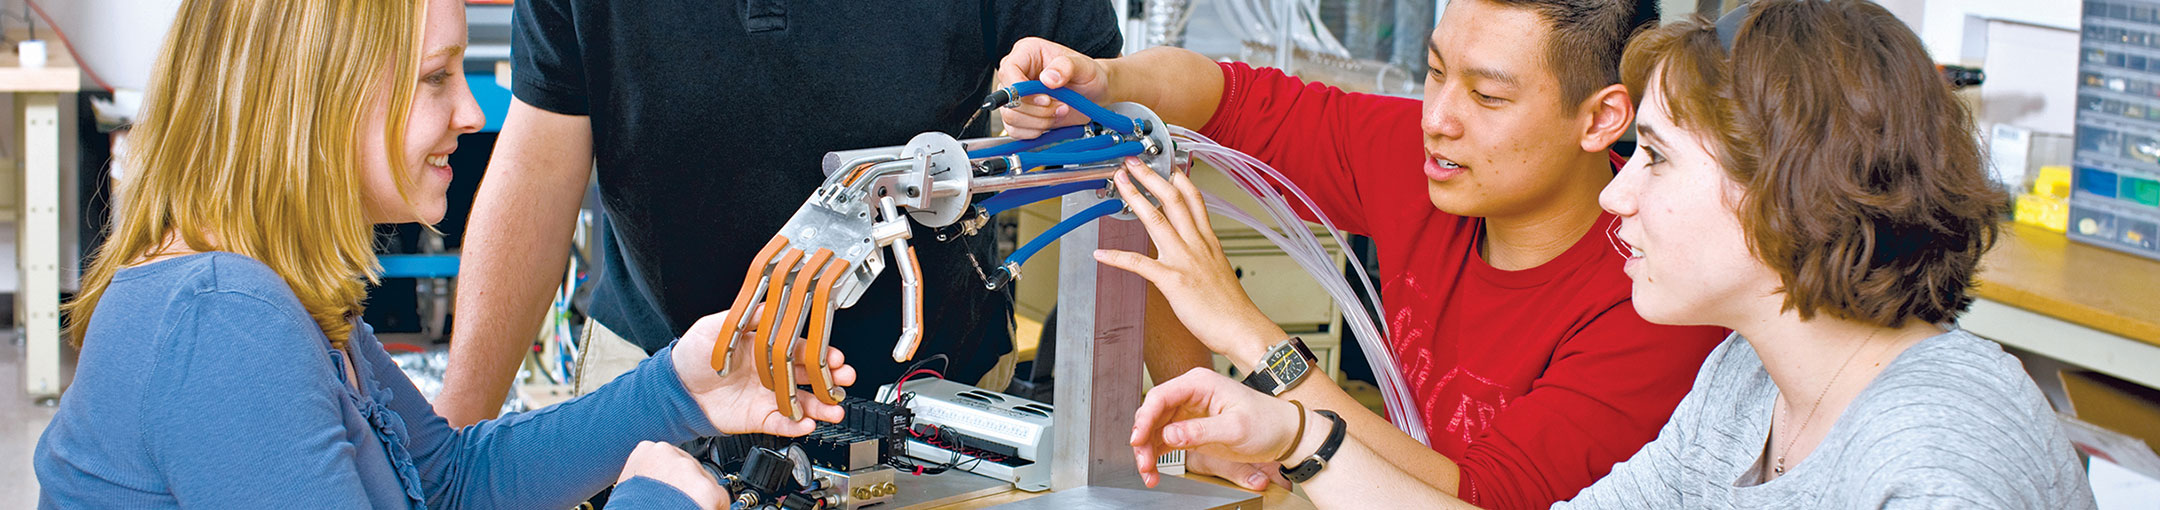 Students using a robotic hand